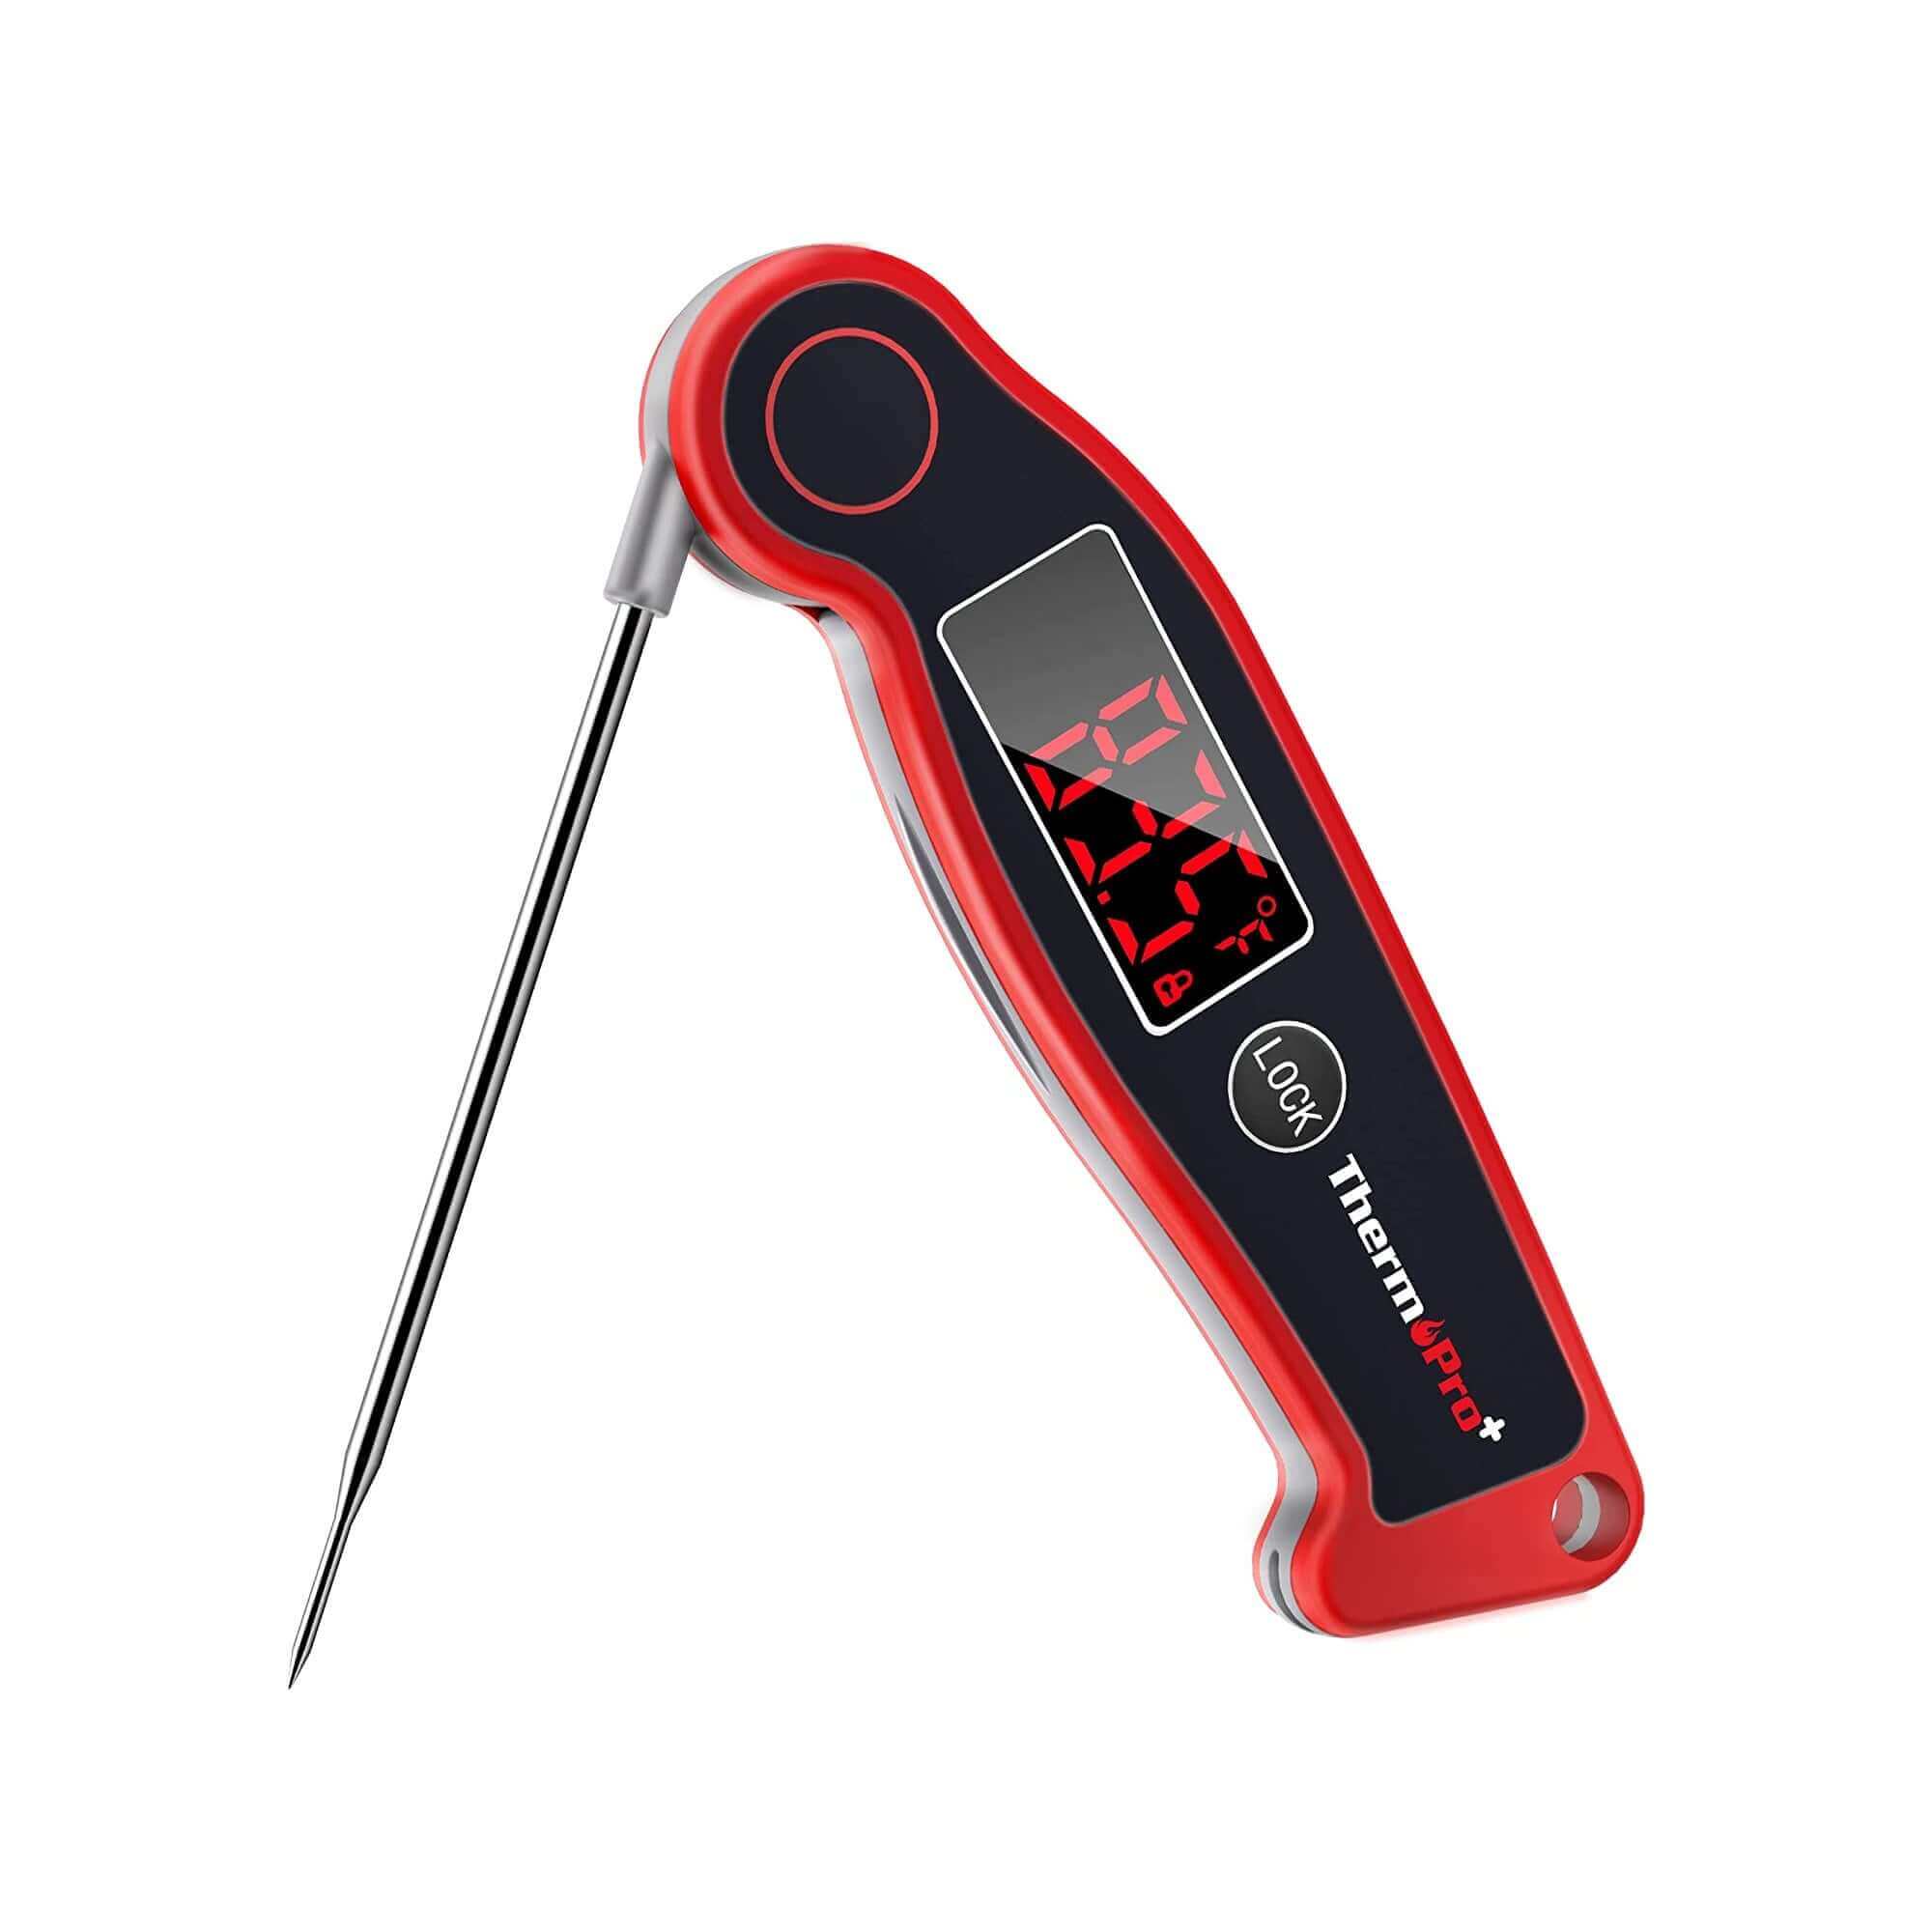  Dual Probe Digital Meat Thermometer for Cooking and Grilling  with Backlight & Calibration Instant Read Kitchen Food Thermometer for BBQ  Baking and Candy Thermometer for Christmas: Home & Kitchen